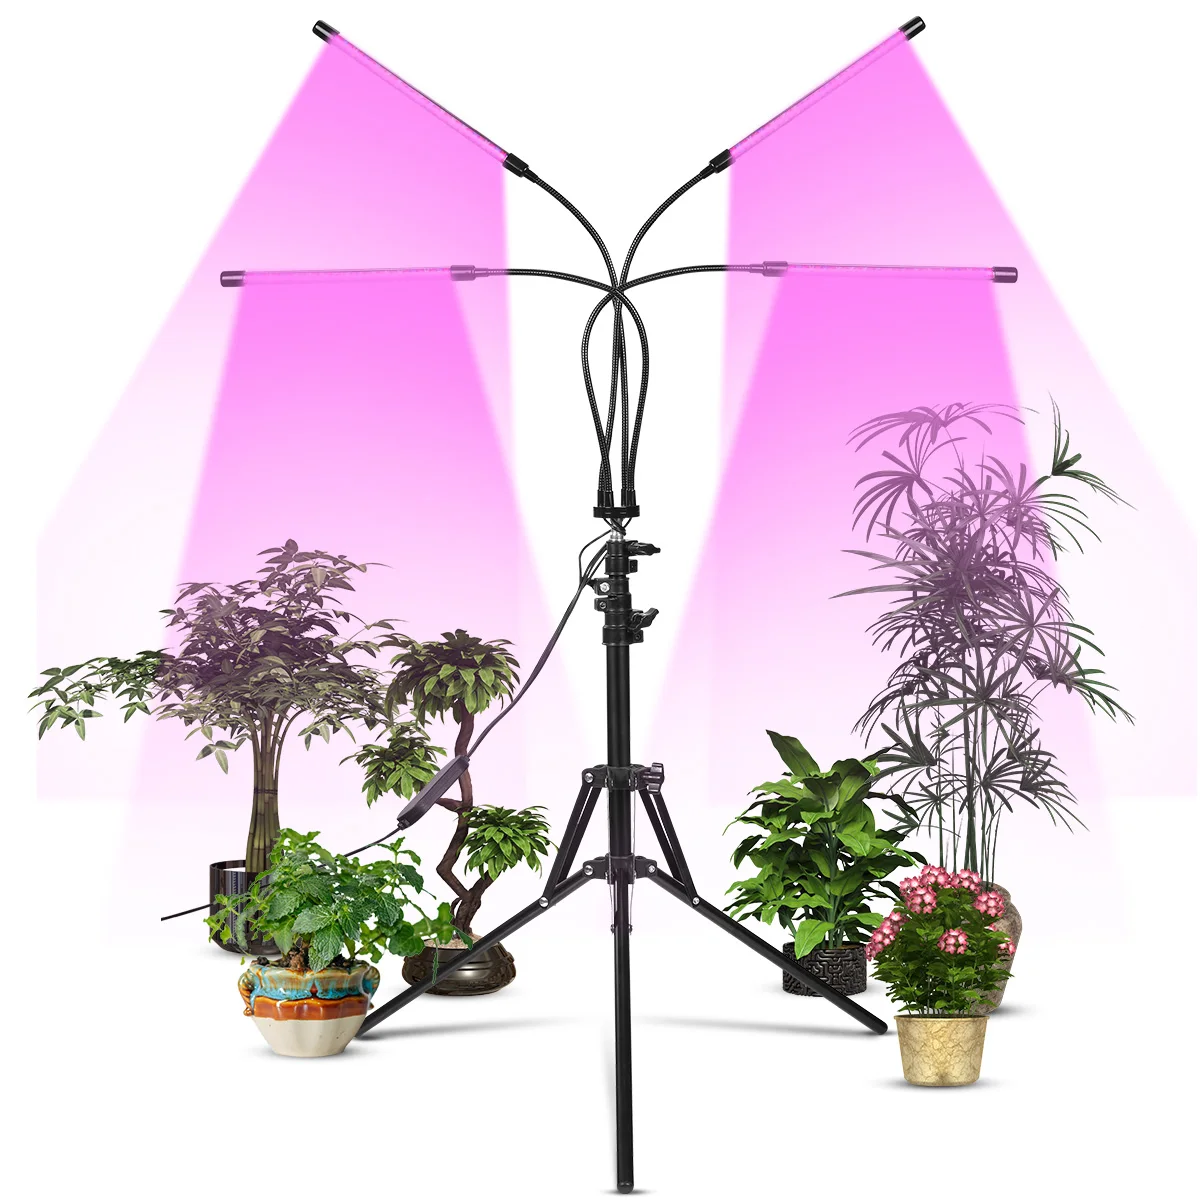 

40W Indoor Plant Grow Light Hydroponic Growing Systems Greenhouse Led Grow light Full Spectrum